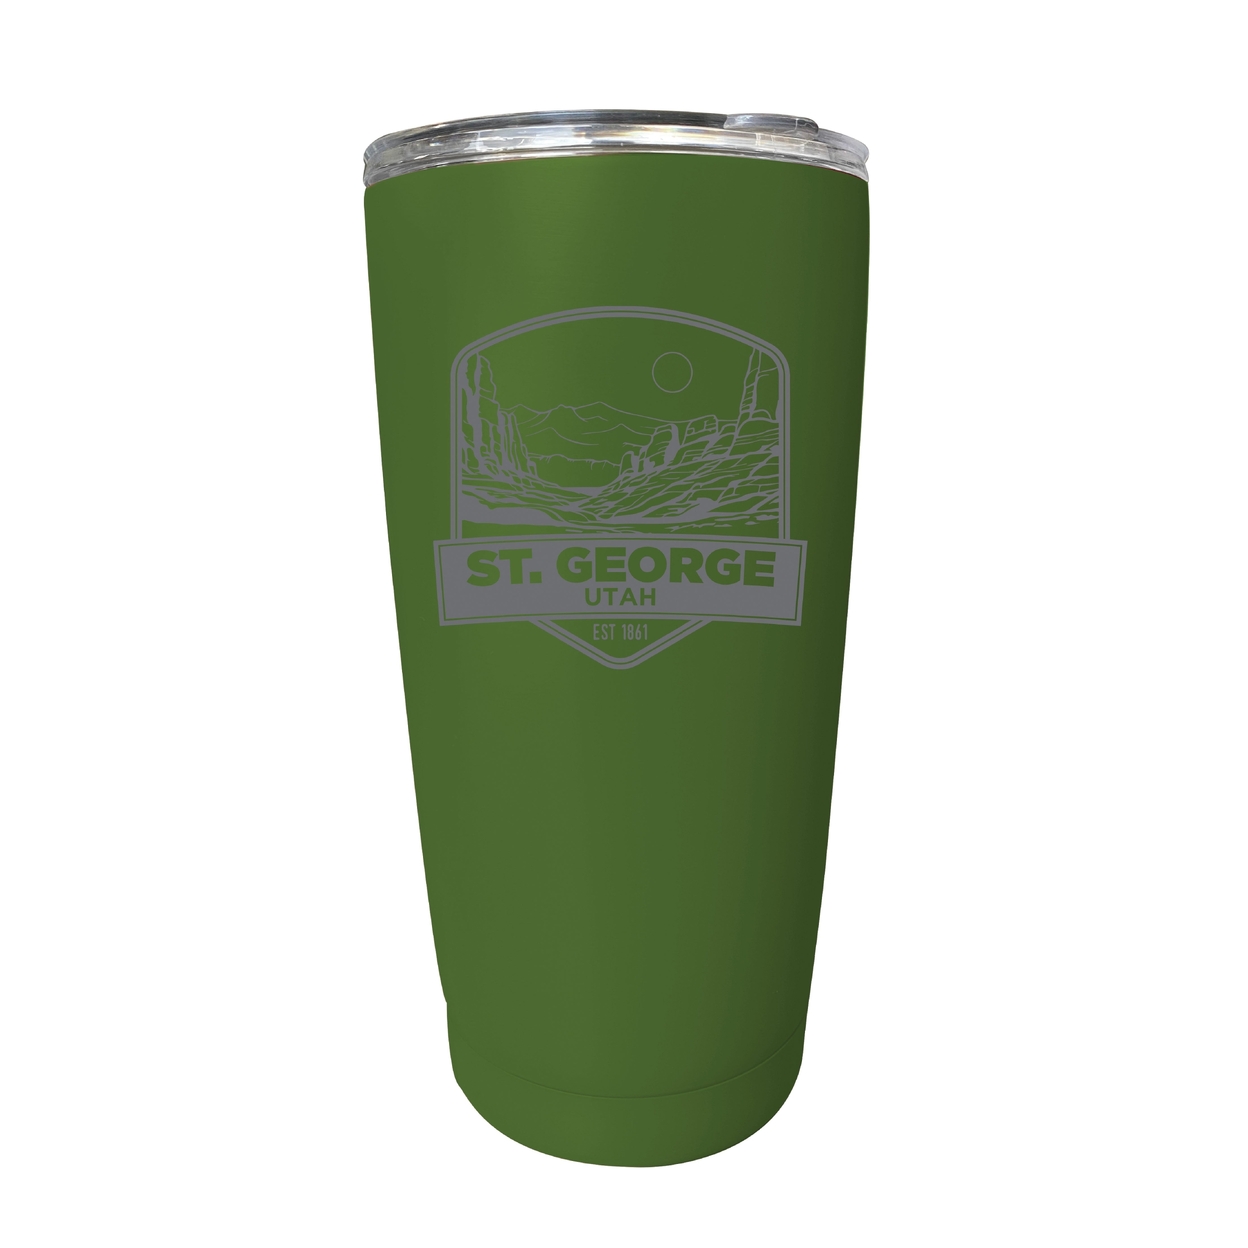 St. George Utah Souvenir 16 Oz Engraved Stainless Steel Insulated Tumbler - Green,,2-Pack